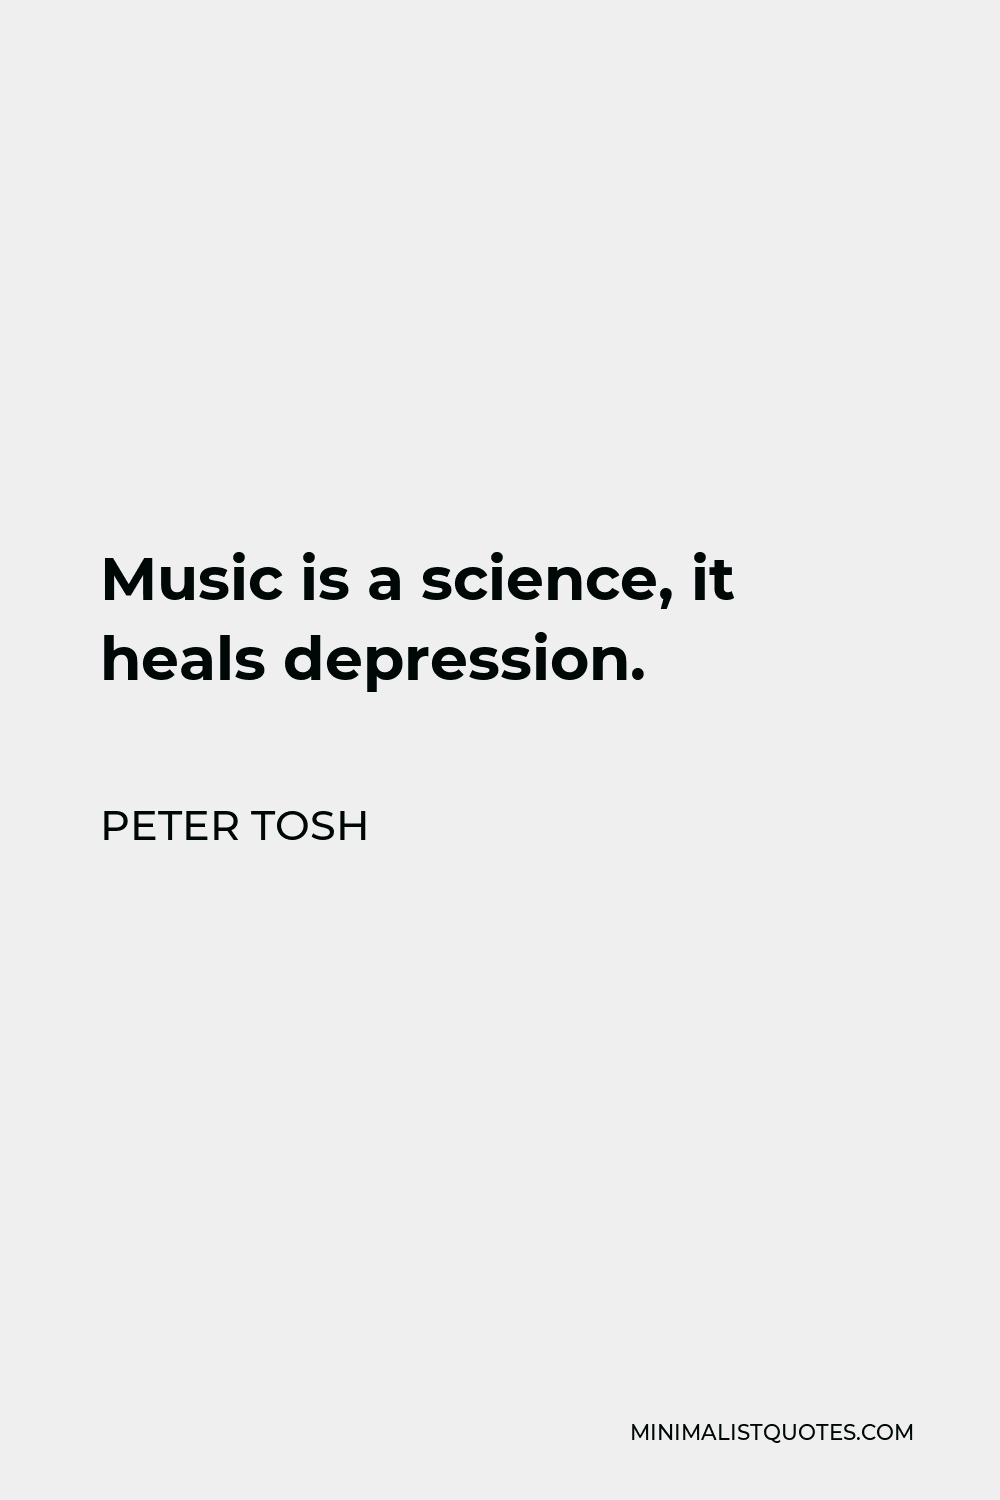 Peter Tosh Quote: Music is a science, it heals depression.